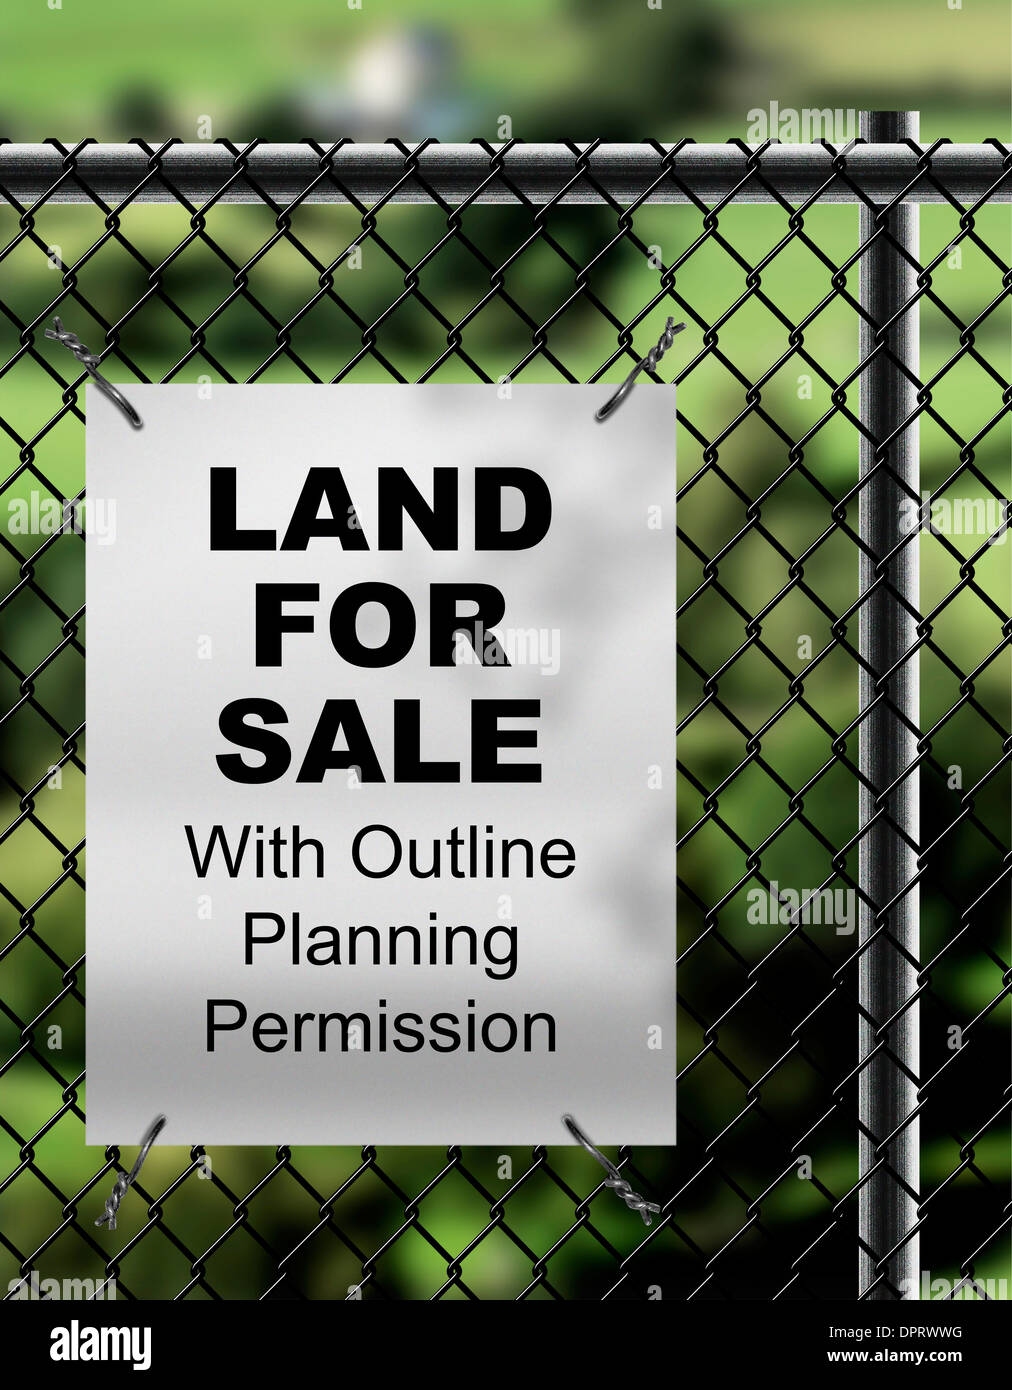 Land For Sale by with Outline Planning Permission  sign fixed on wire fencing. Stock Photo